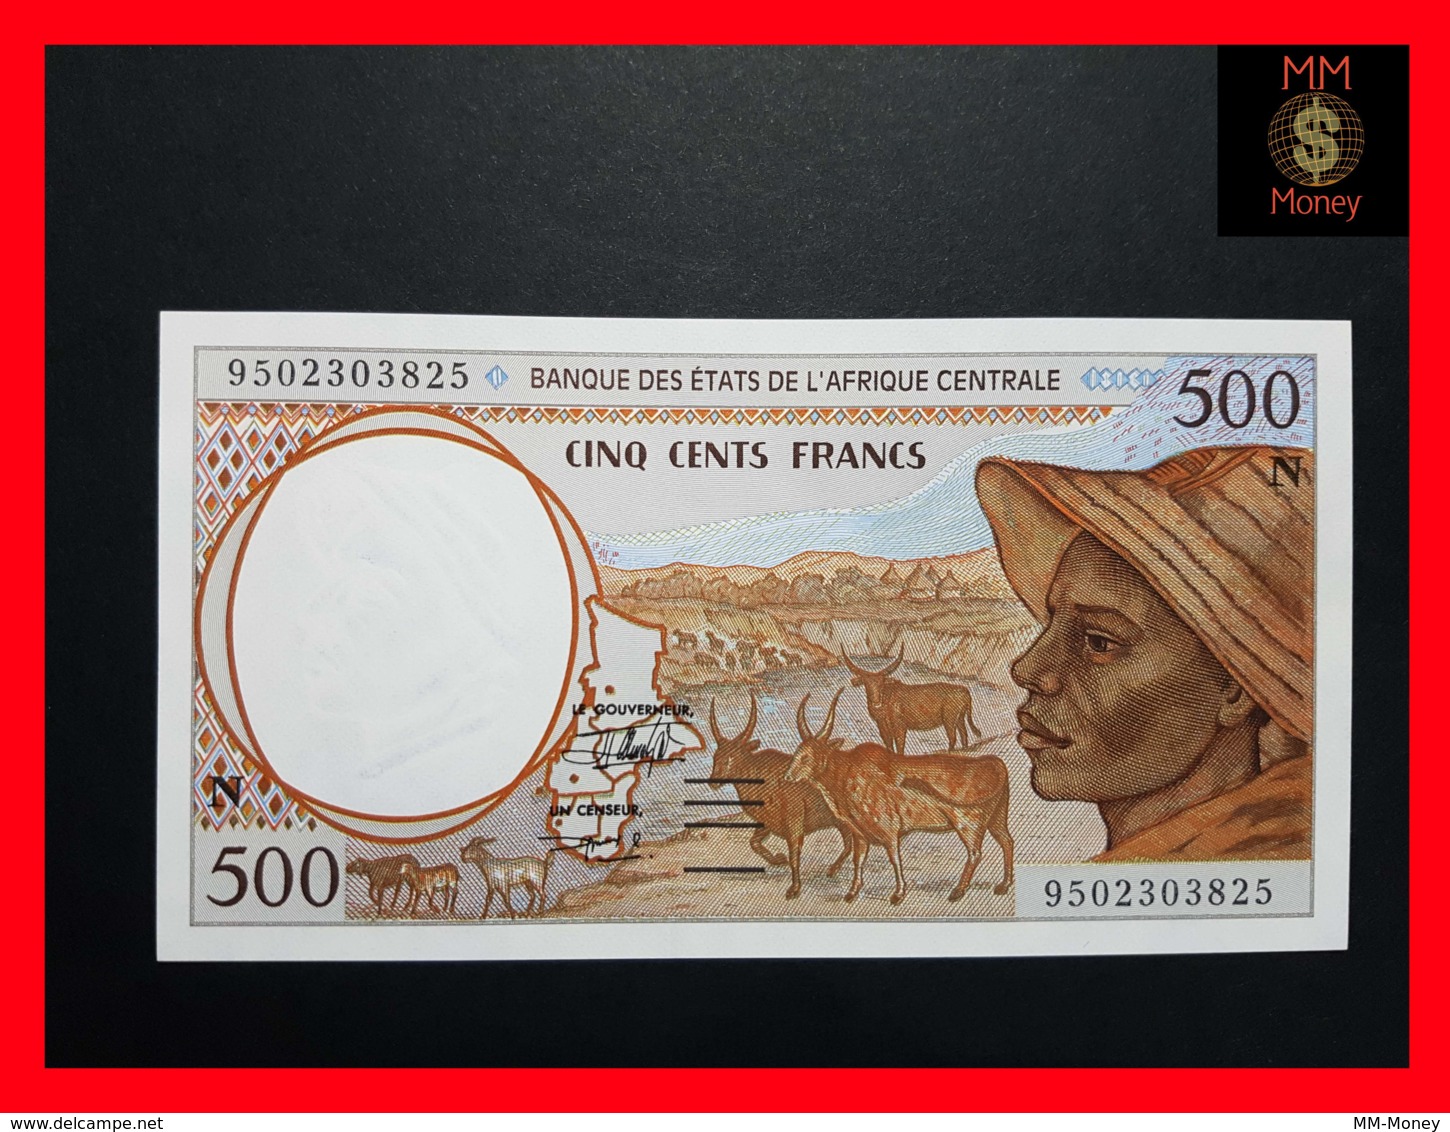 CENTRAL AFRICAN STATES  "N"  EQUATORIAL GUINEA 500 Francs 1995  P. 501 N C  UNC - Centraal-Afrikaanse Staten